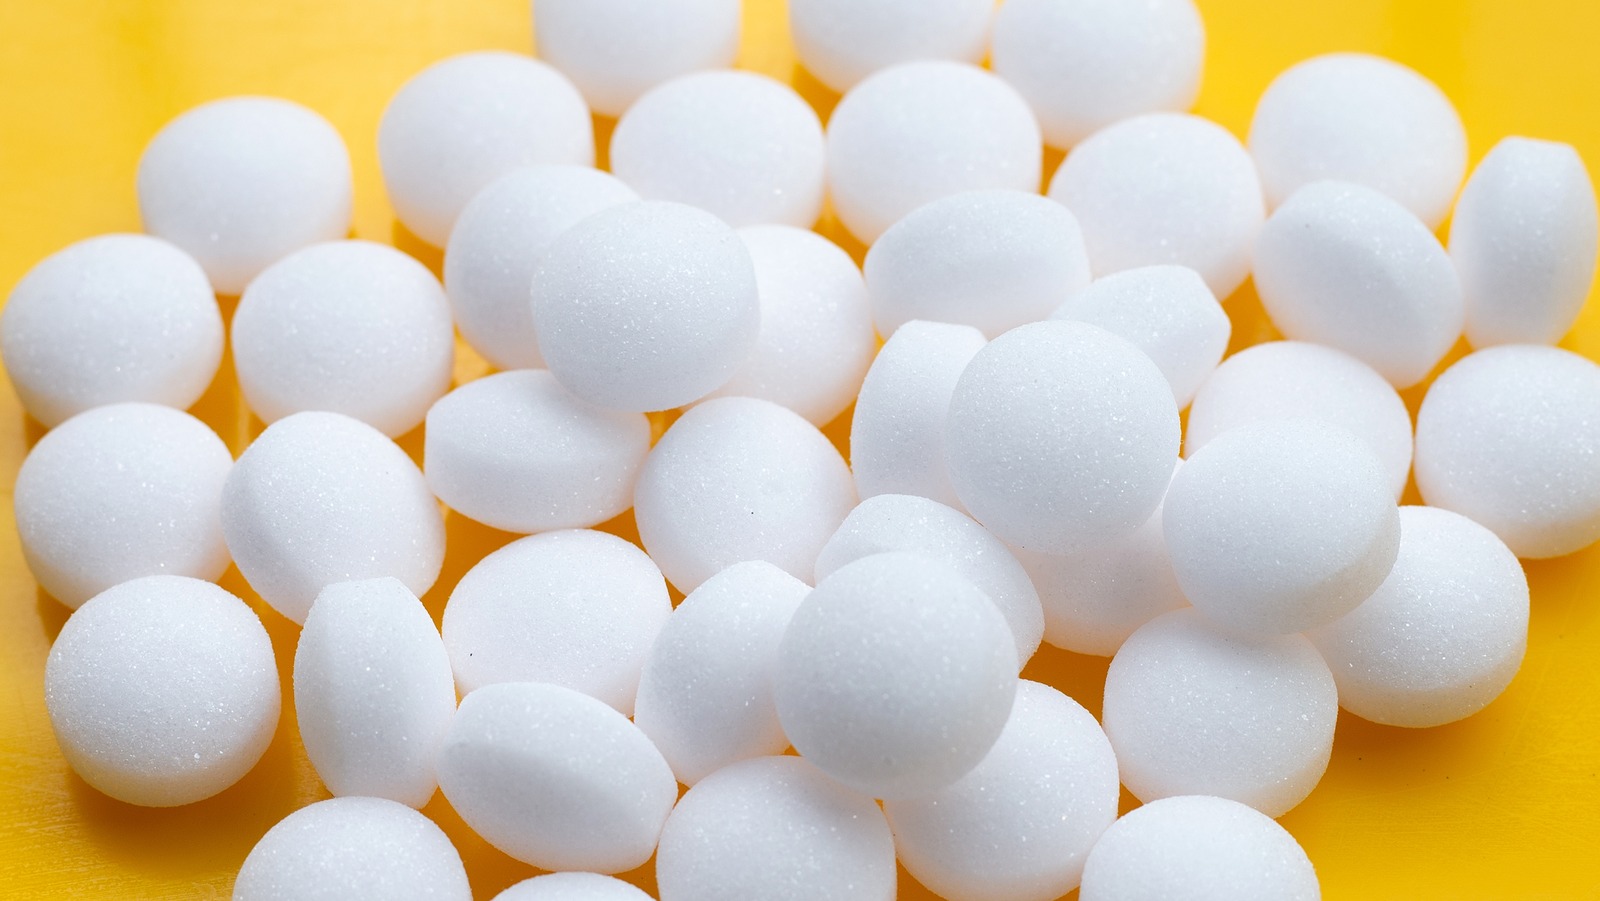 https://www.housedigest.com/img/gallery/why-you-should-stop-using-mothballs-immediately/l-intro-1652351787.jpg